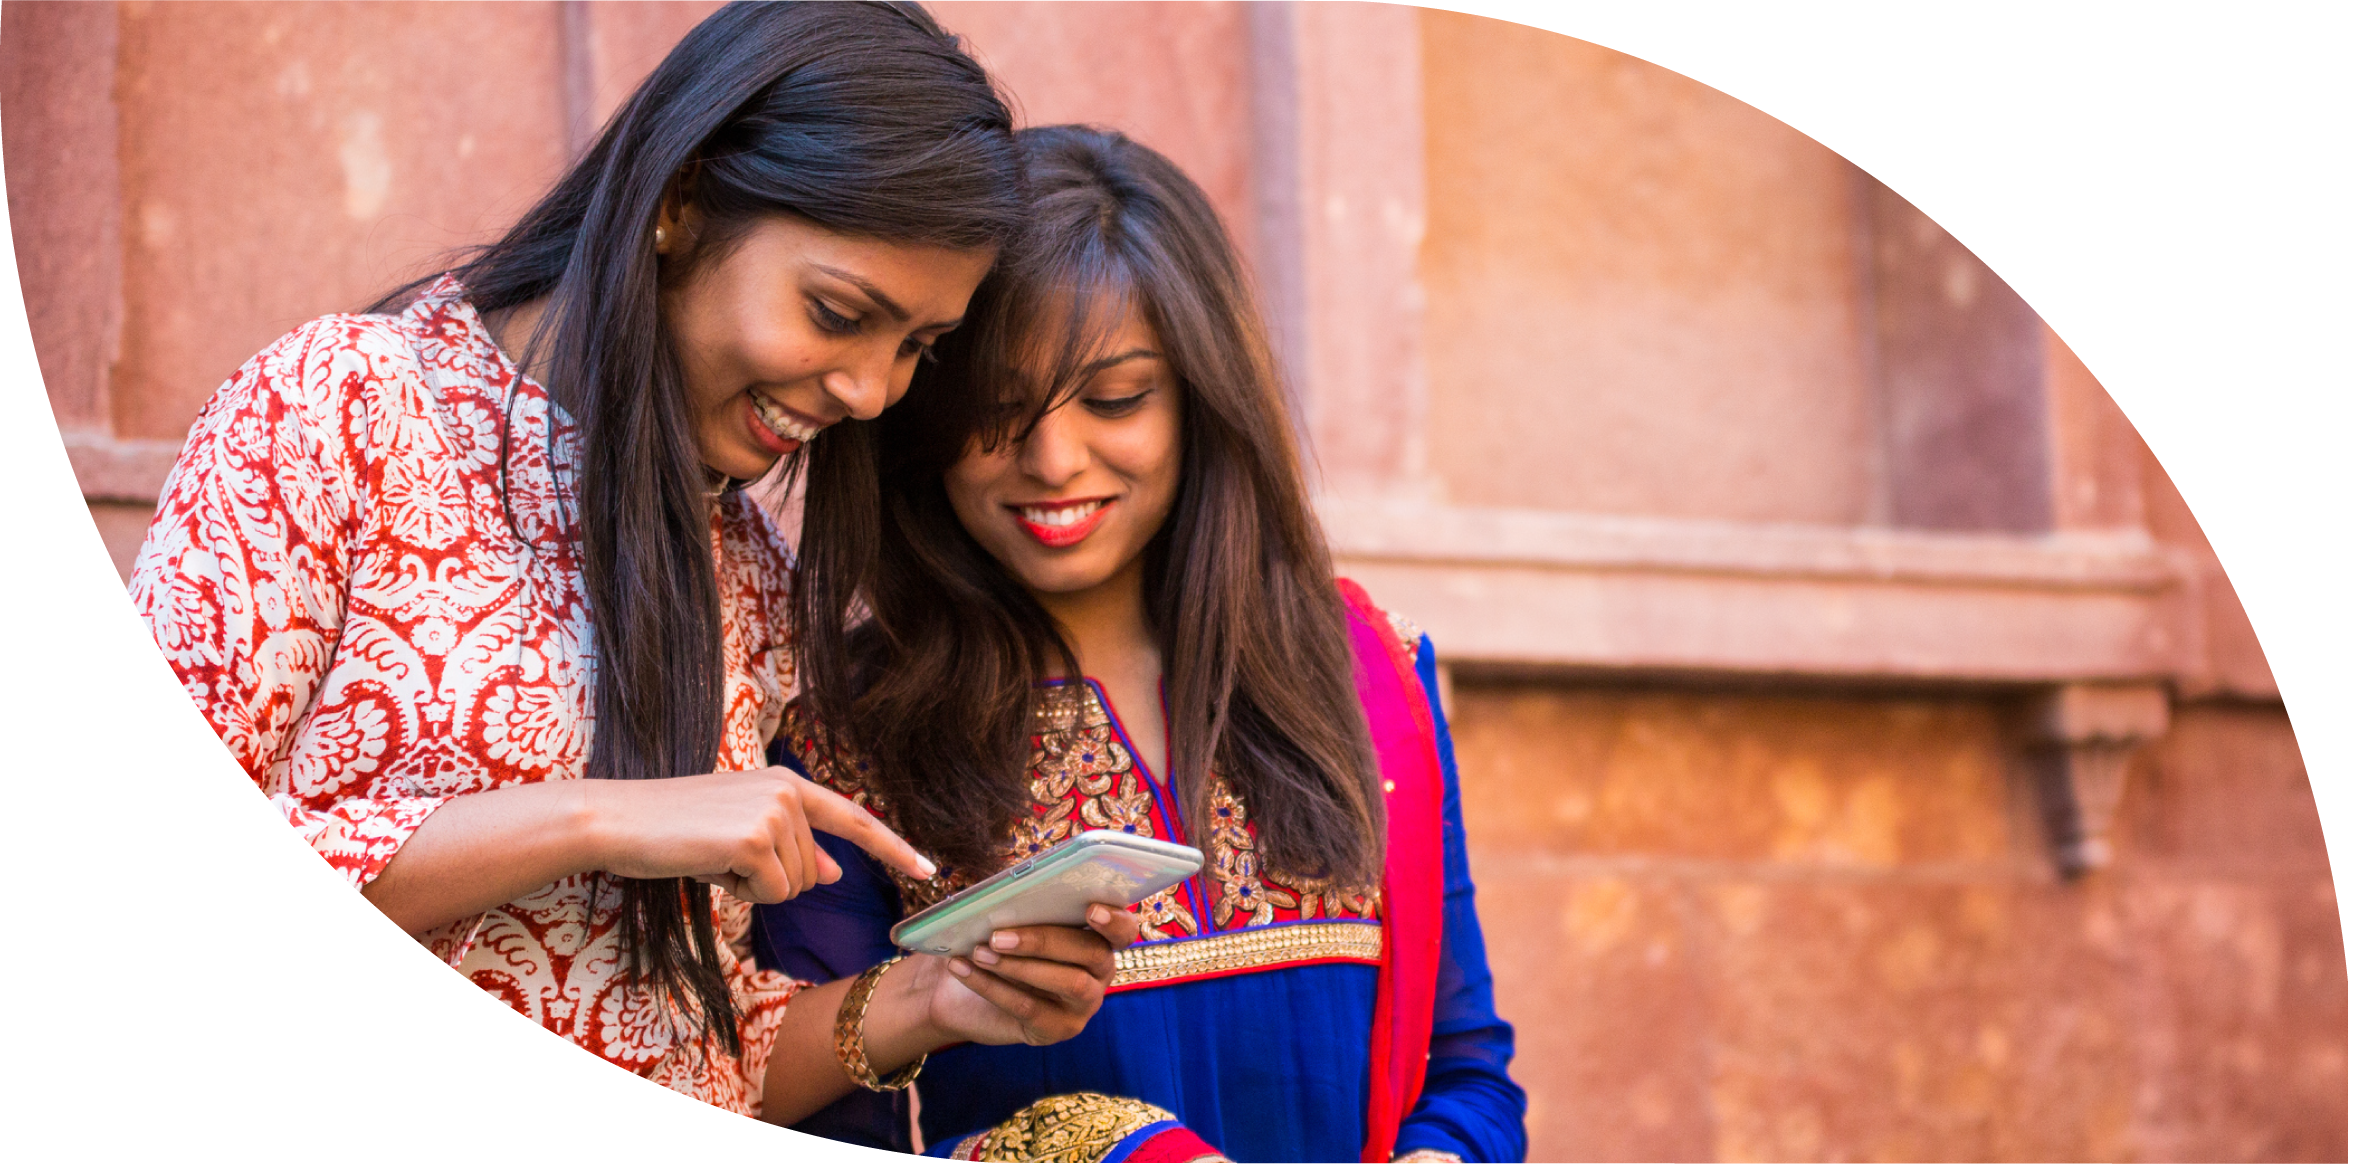 Two women are looking at a mobile phone.